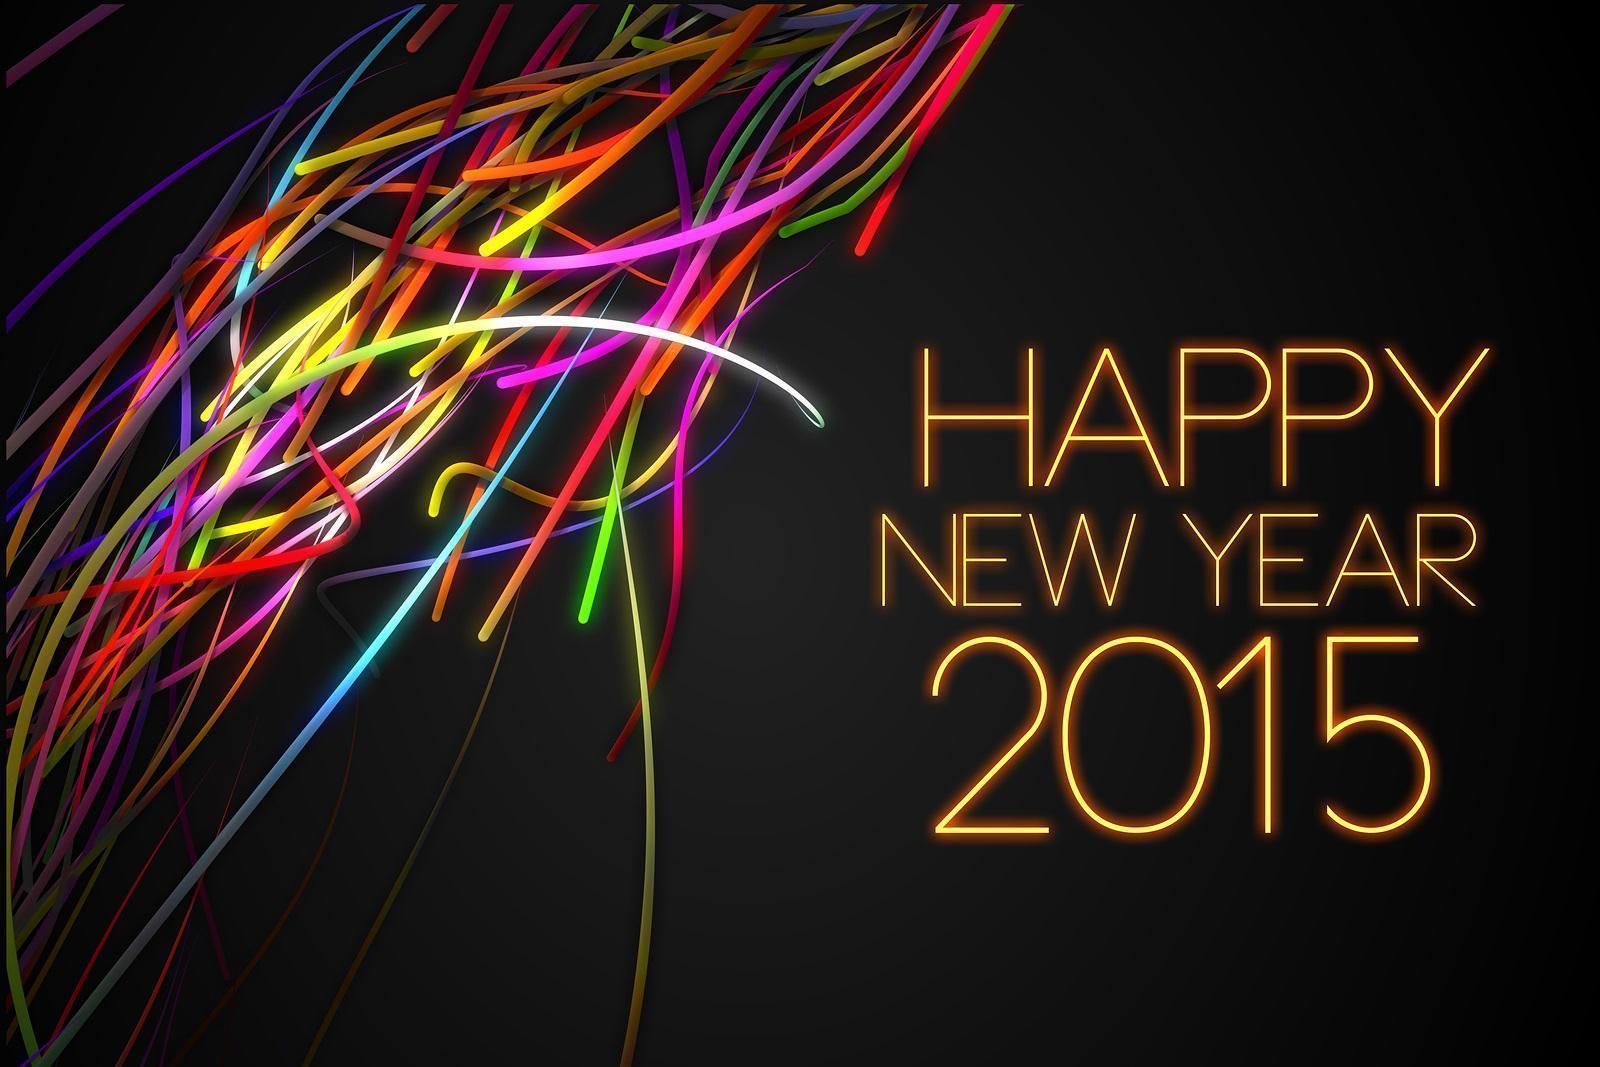 Happy New Year 2015 Abstract Image Wallpaper Wallpaper